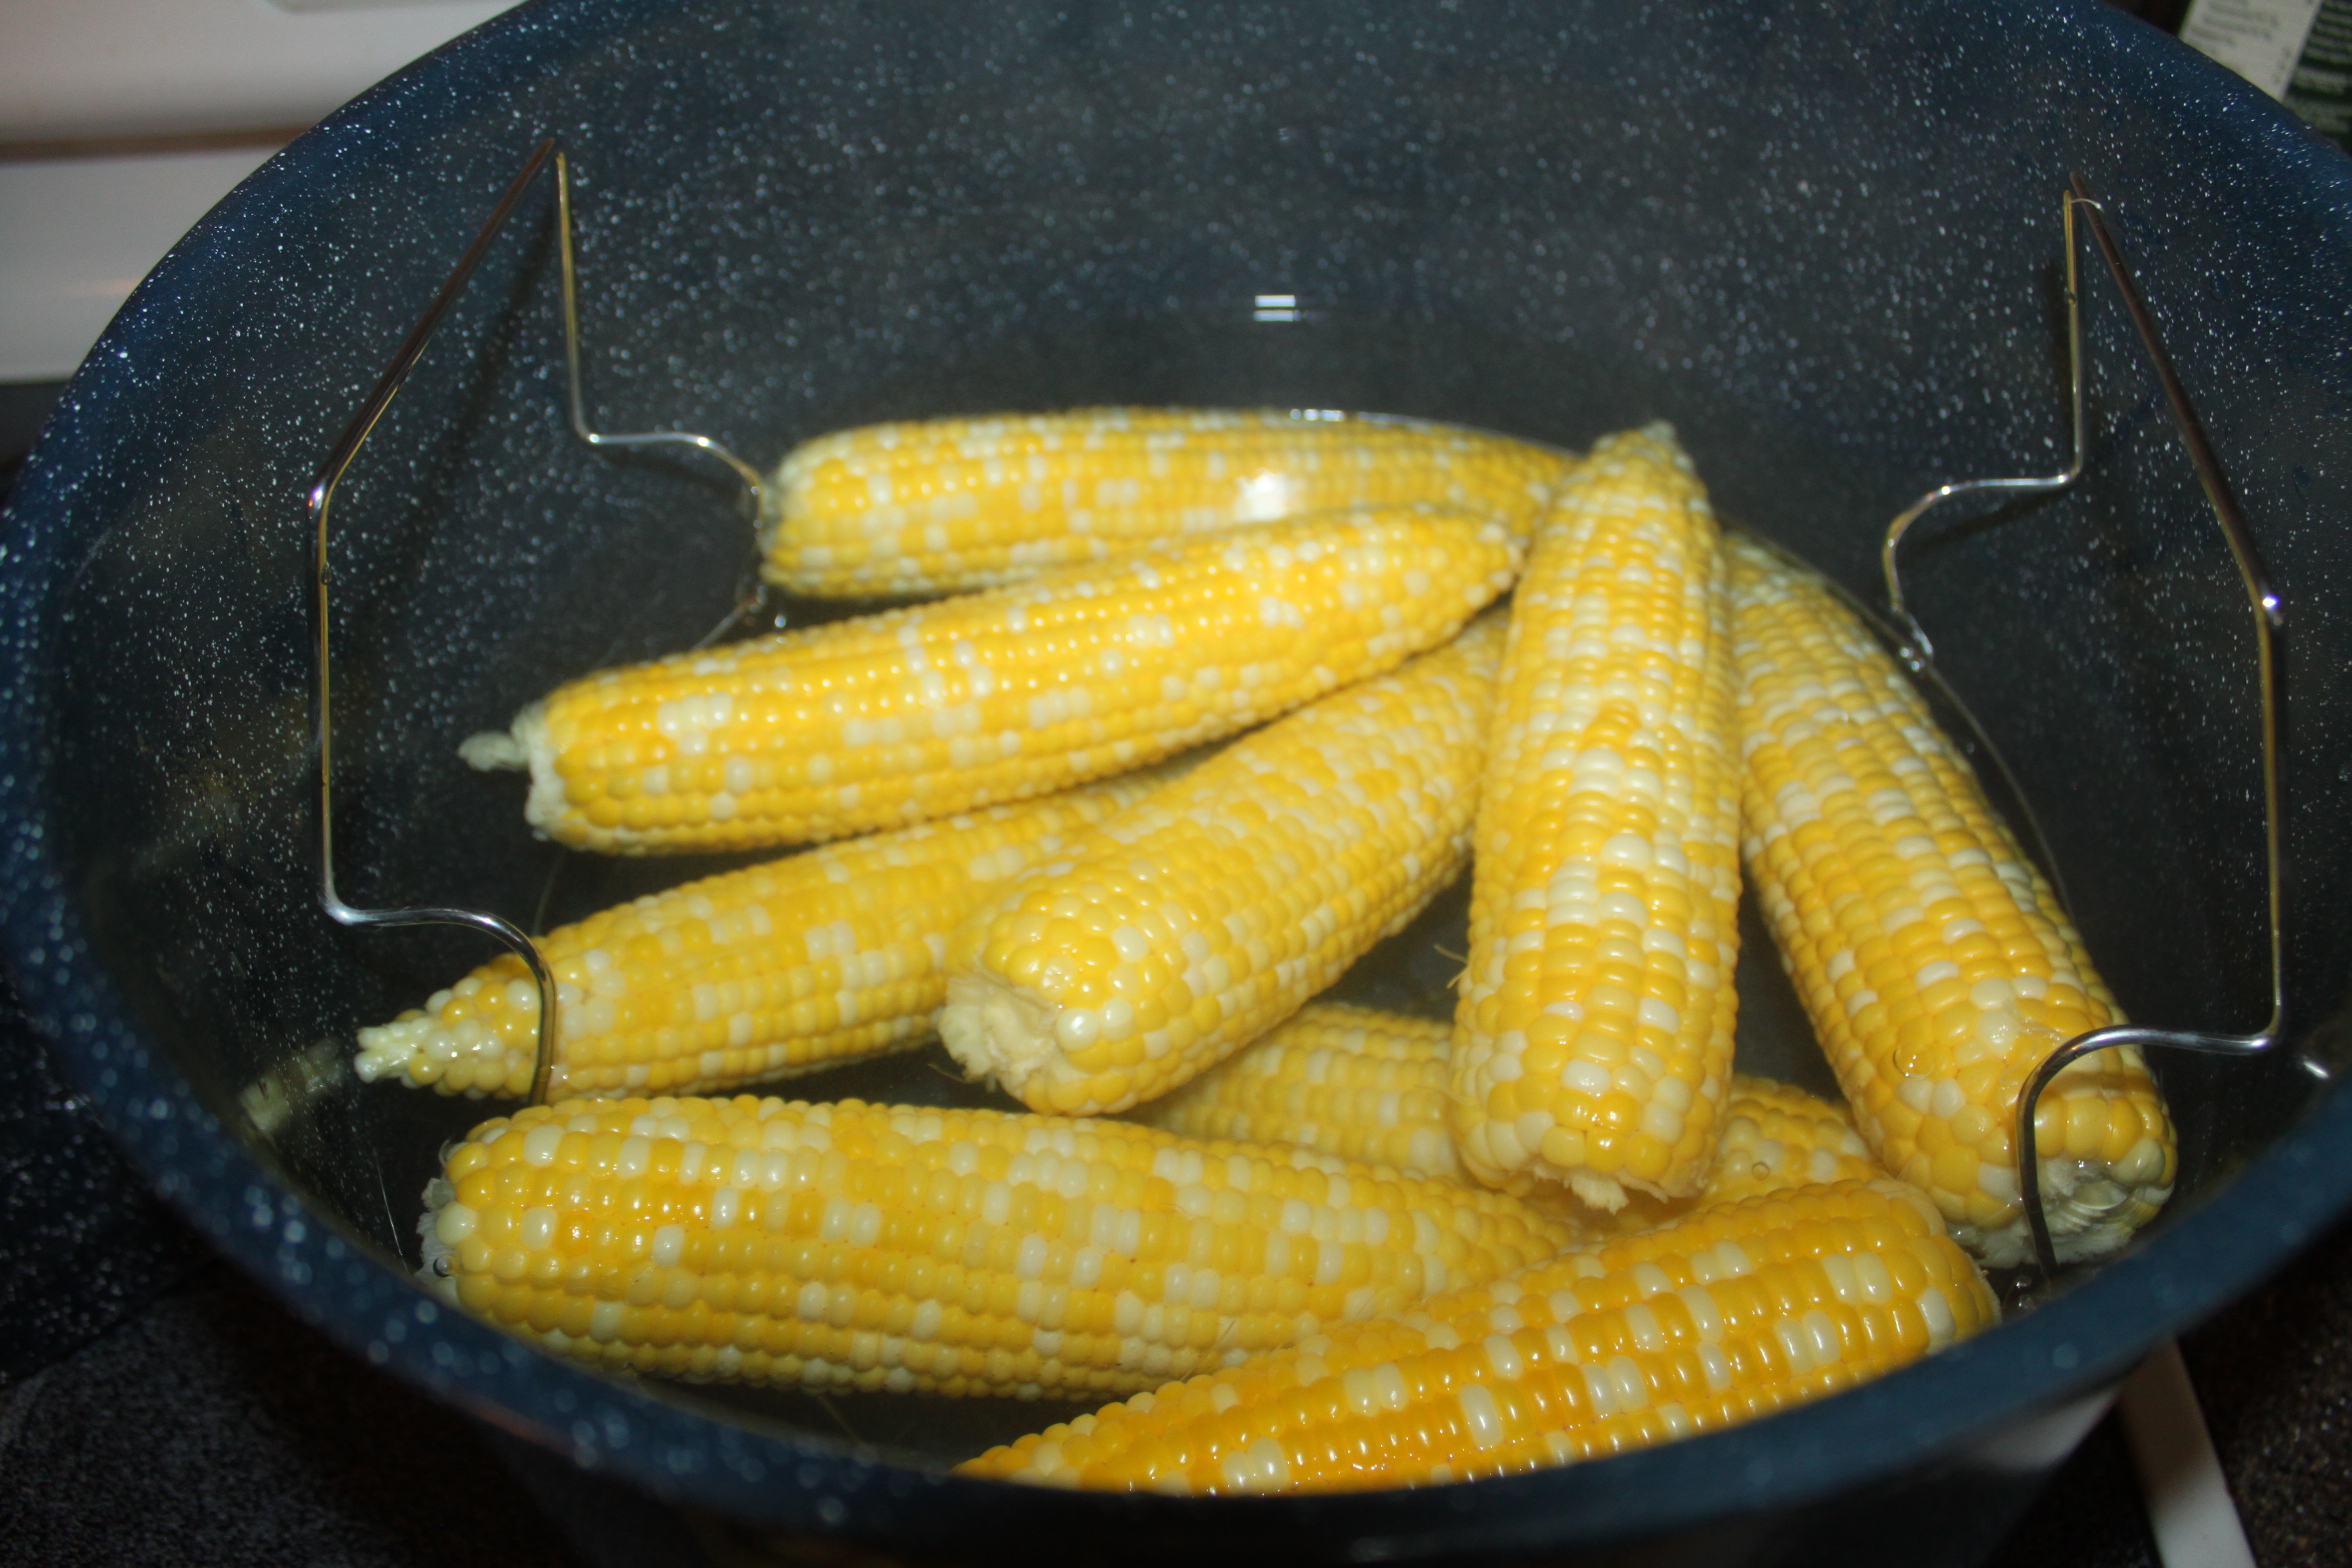 Place husked corn in boiling water for 3 minutes.